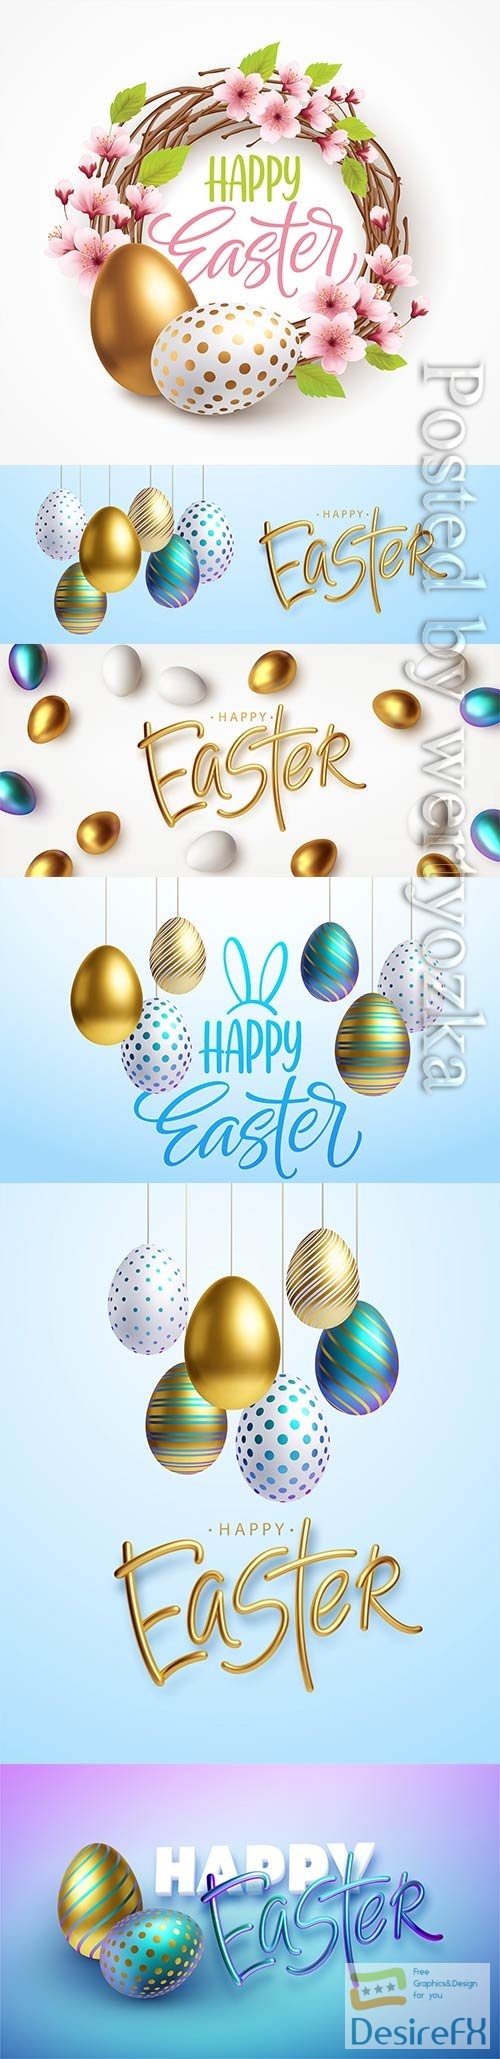 Happy easter on a background of easter eggs